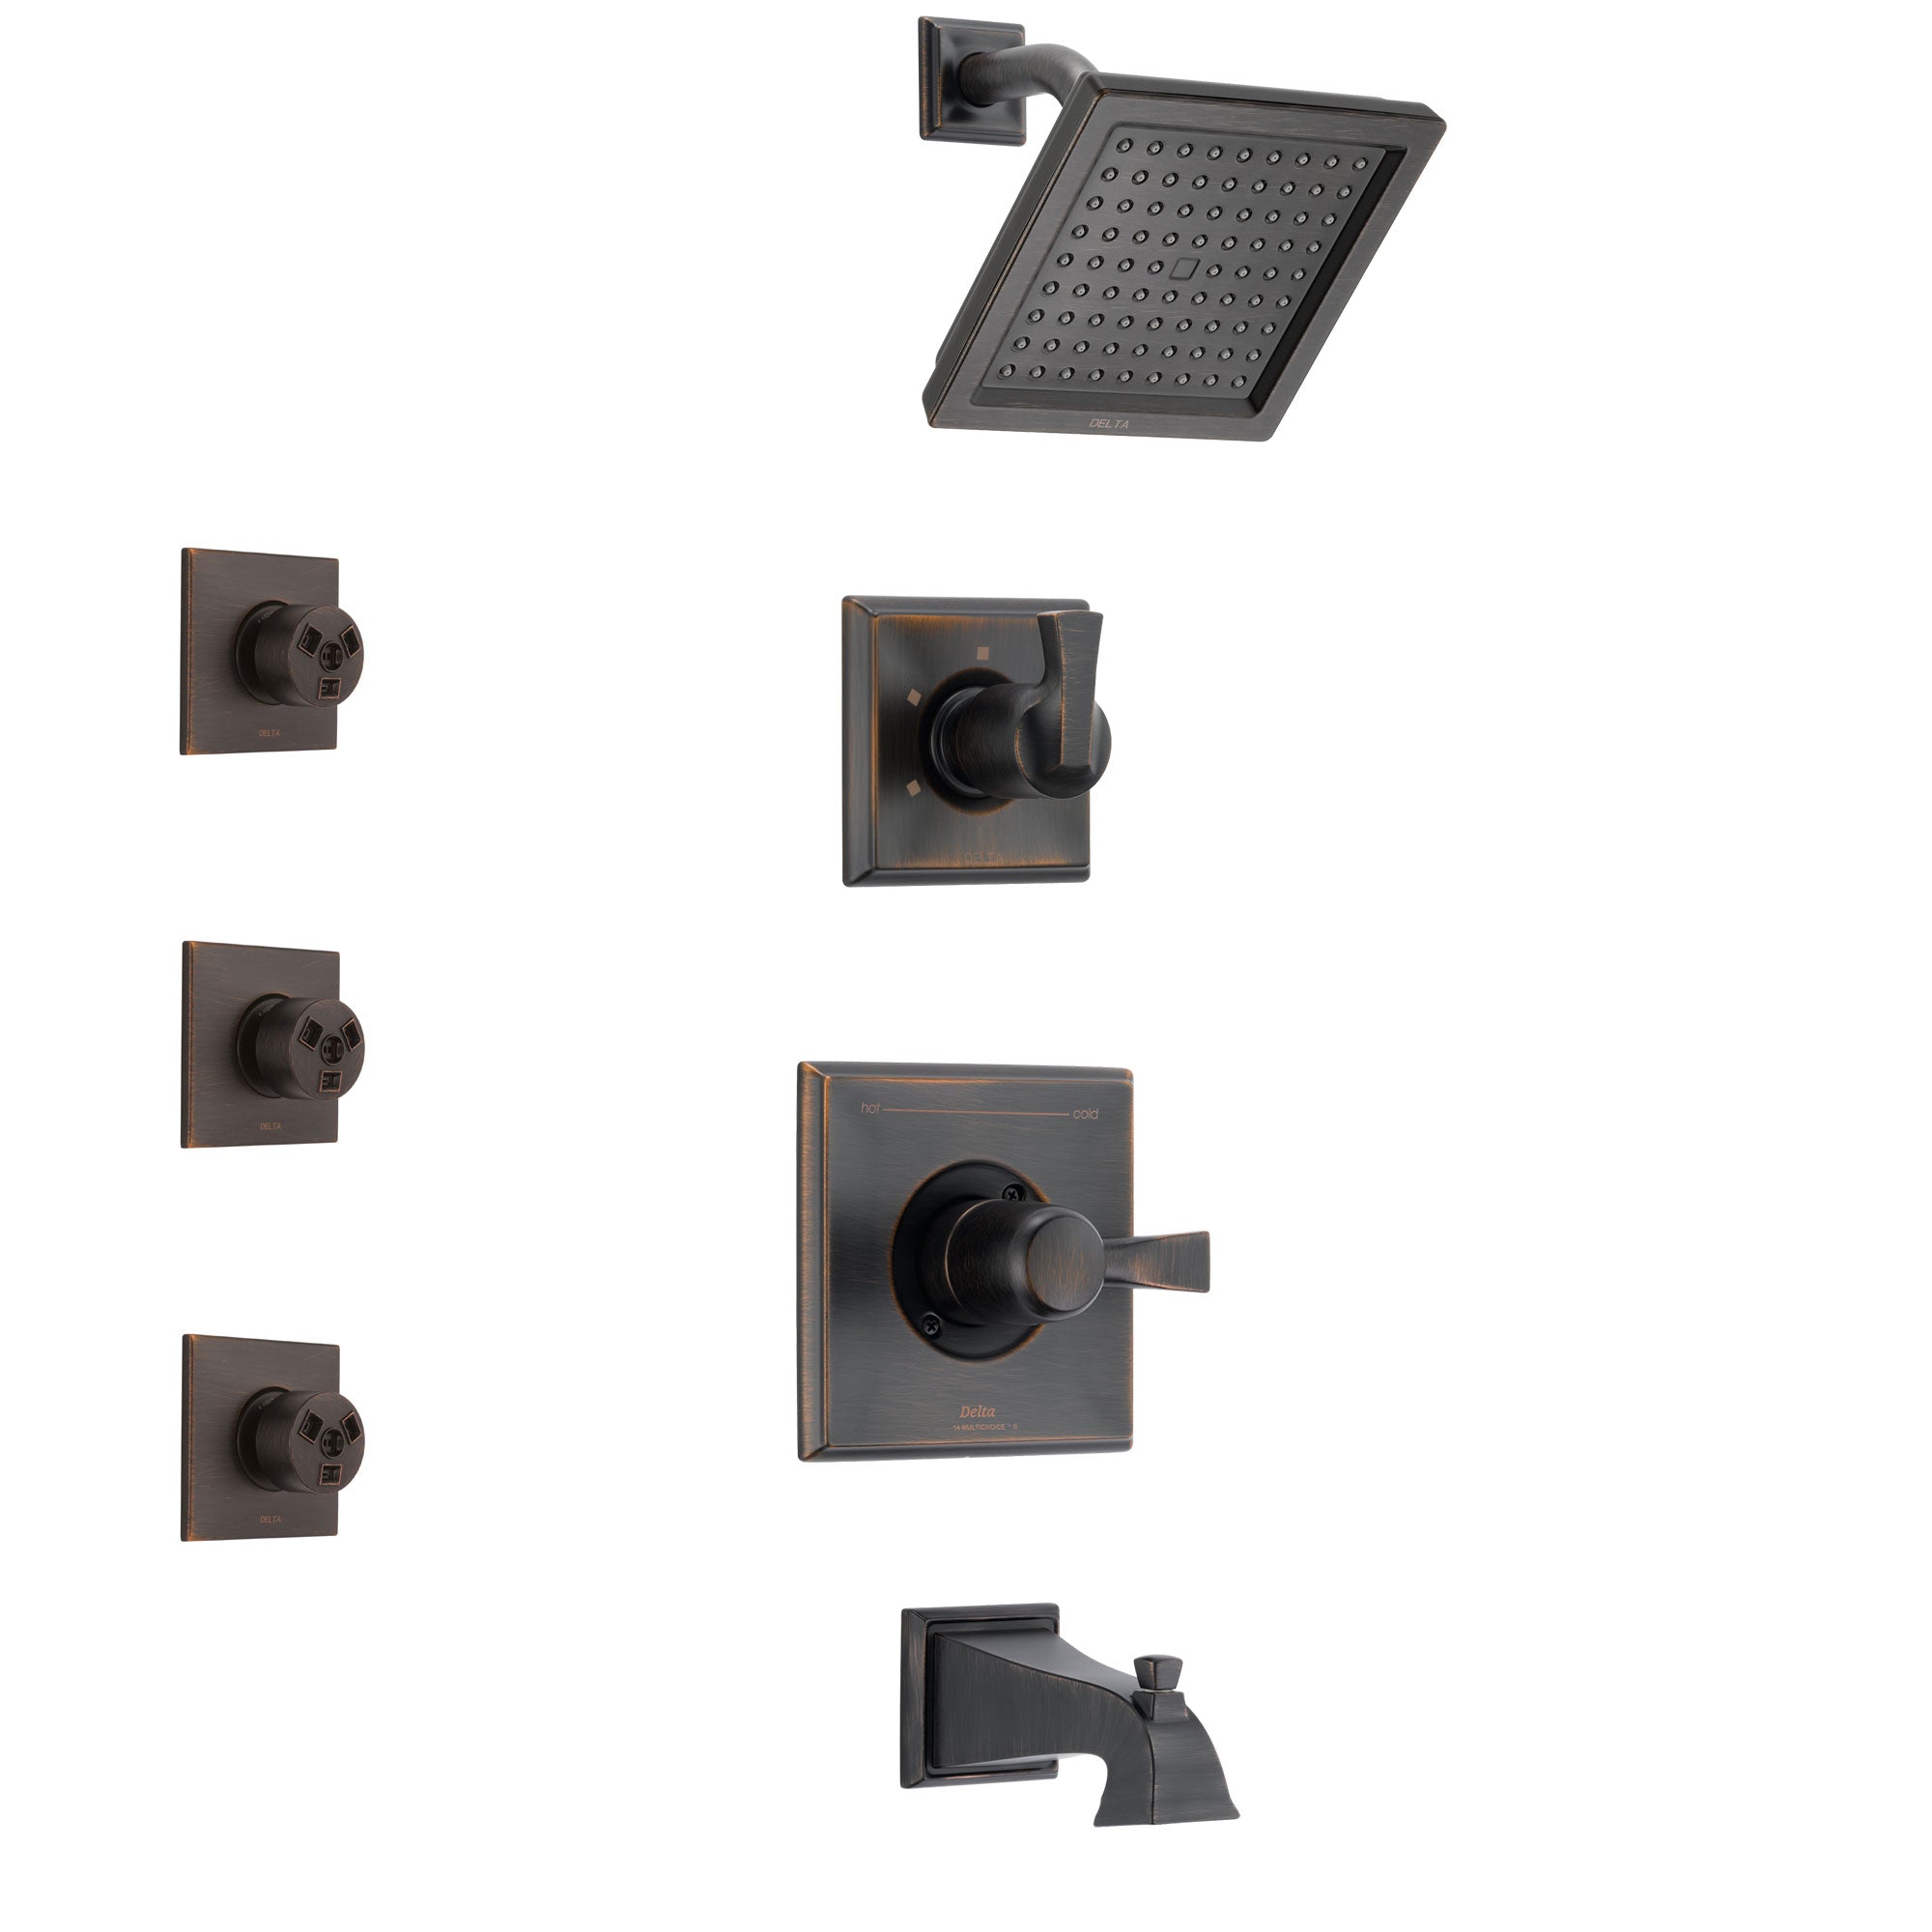 Delta Dryden Venetian Bronze Finish Tub and Shower System with Control Handle, 3-Setting Diverter, Showerhead, and 3 Body Sprays SS144511RB1